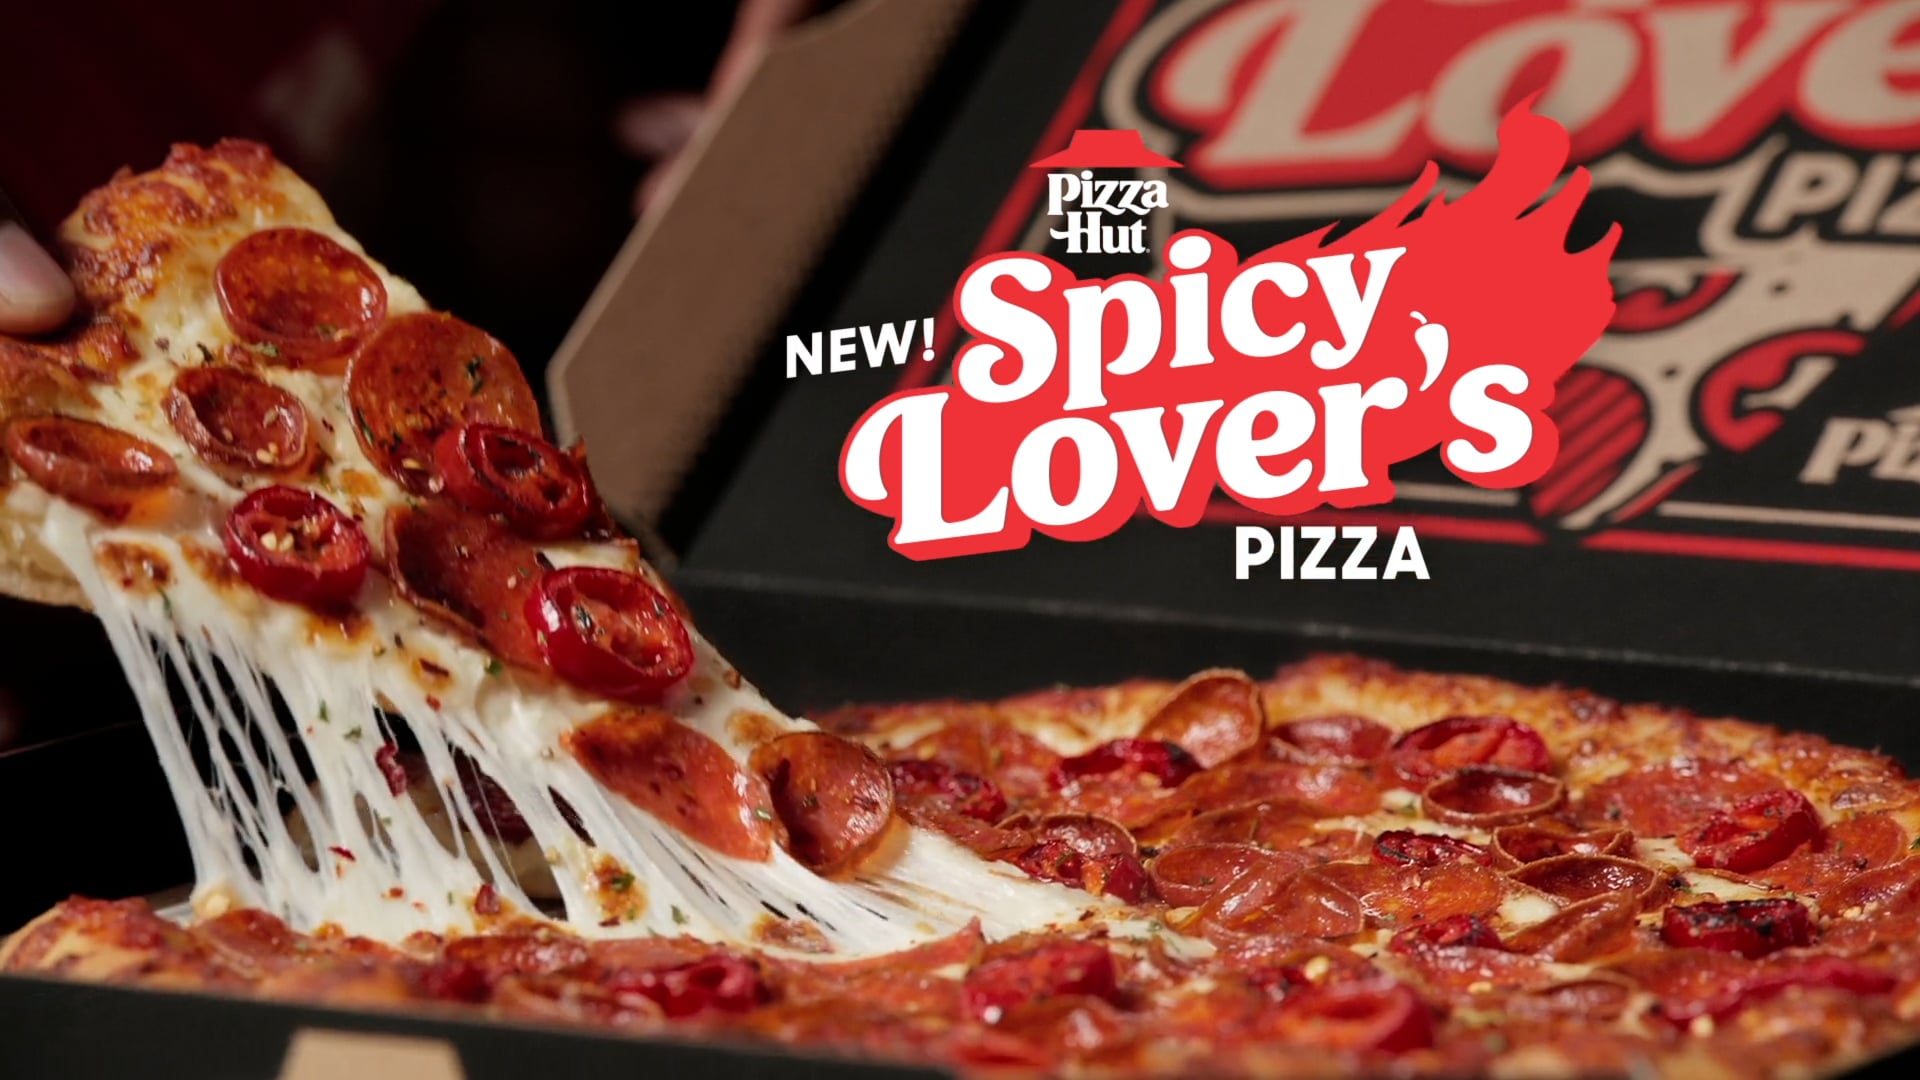 Pizza Hut "Spicy Lovers"